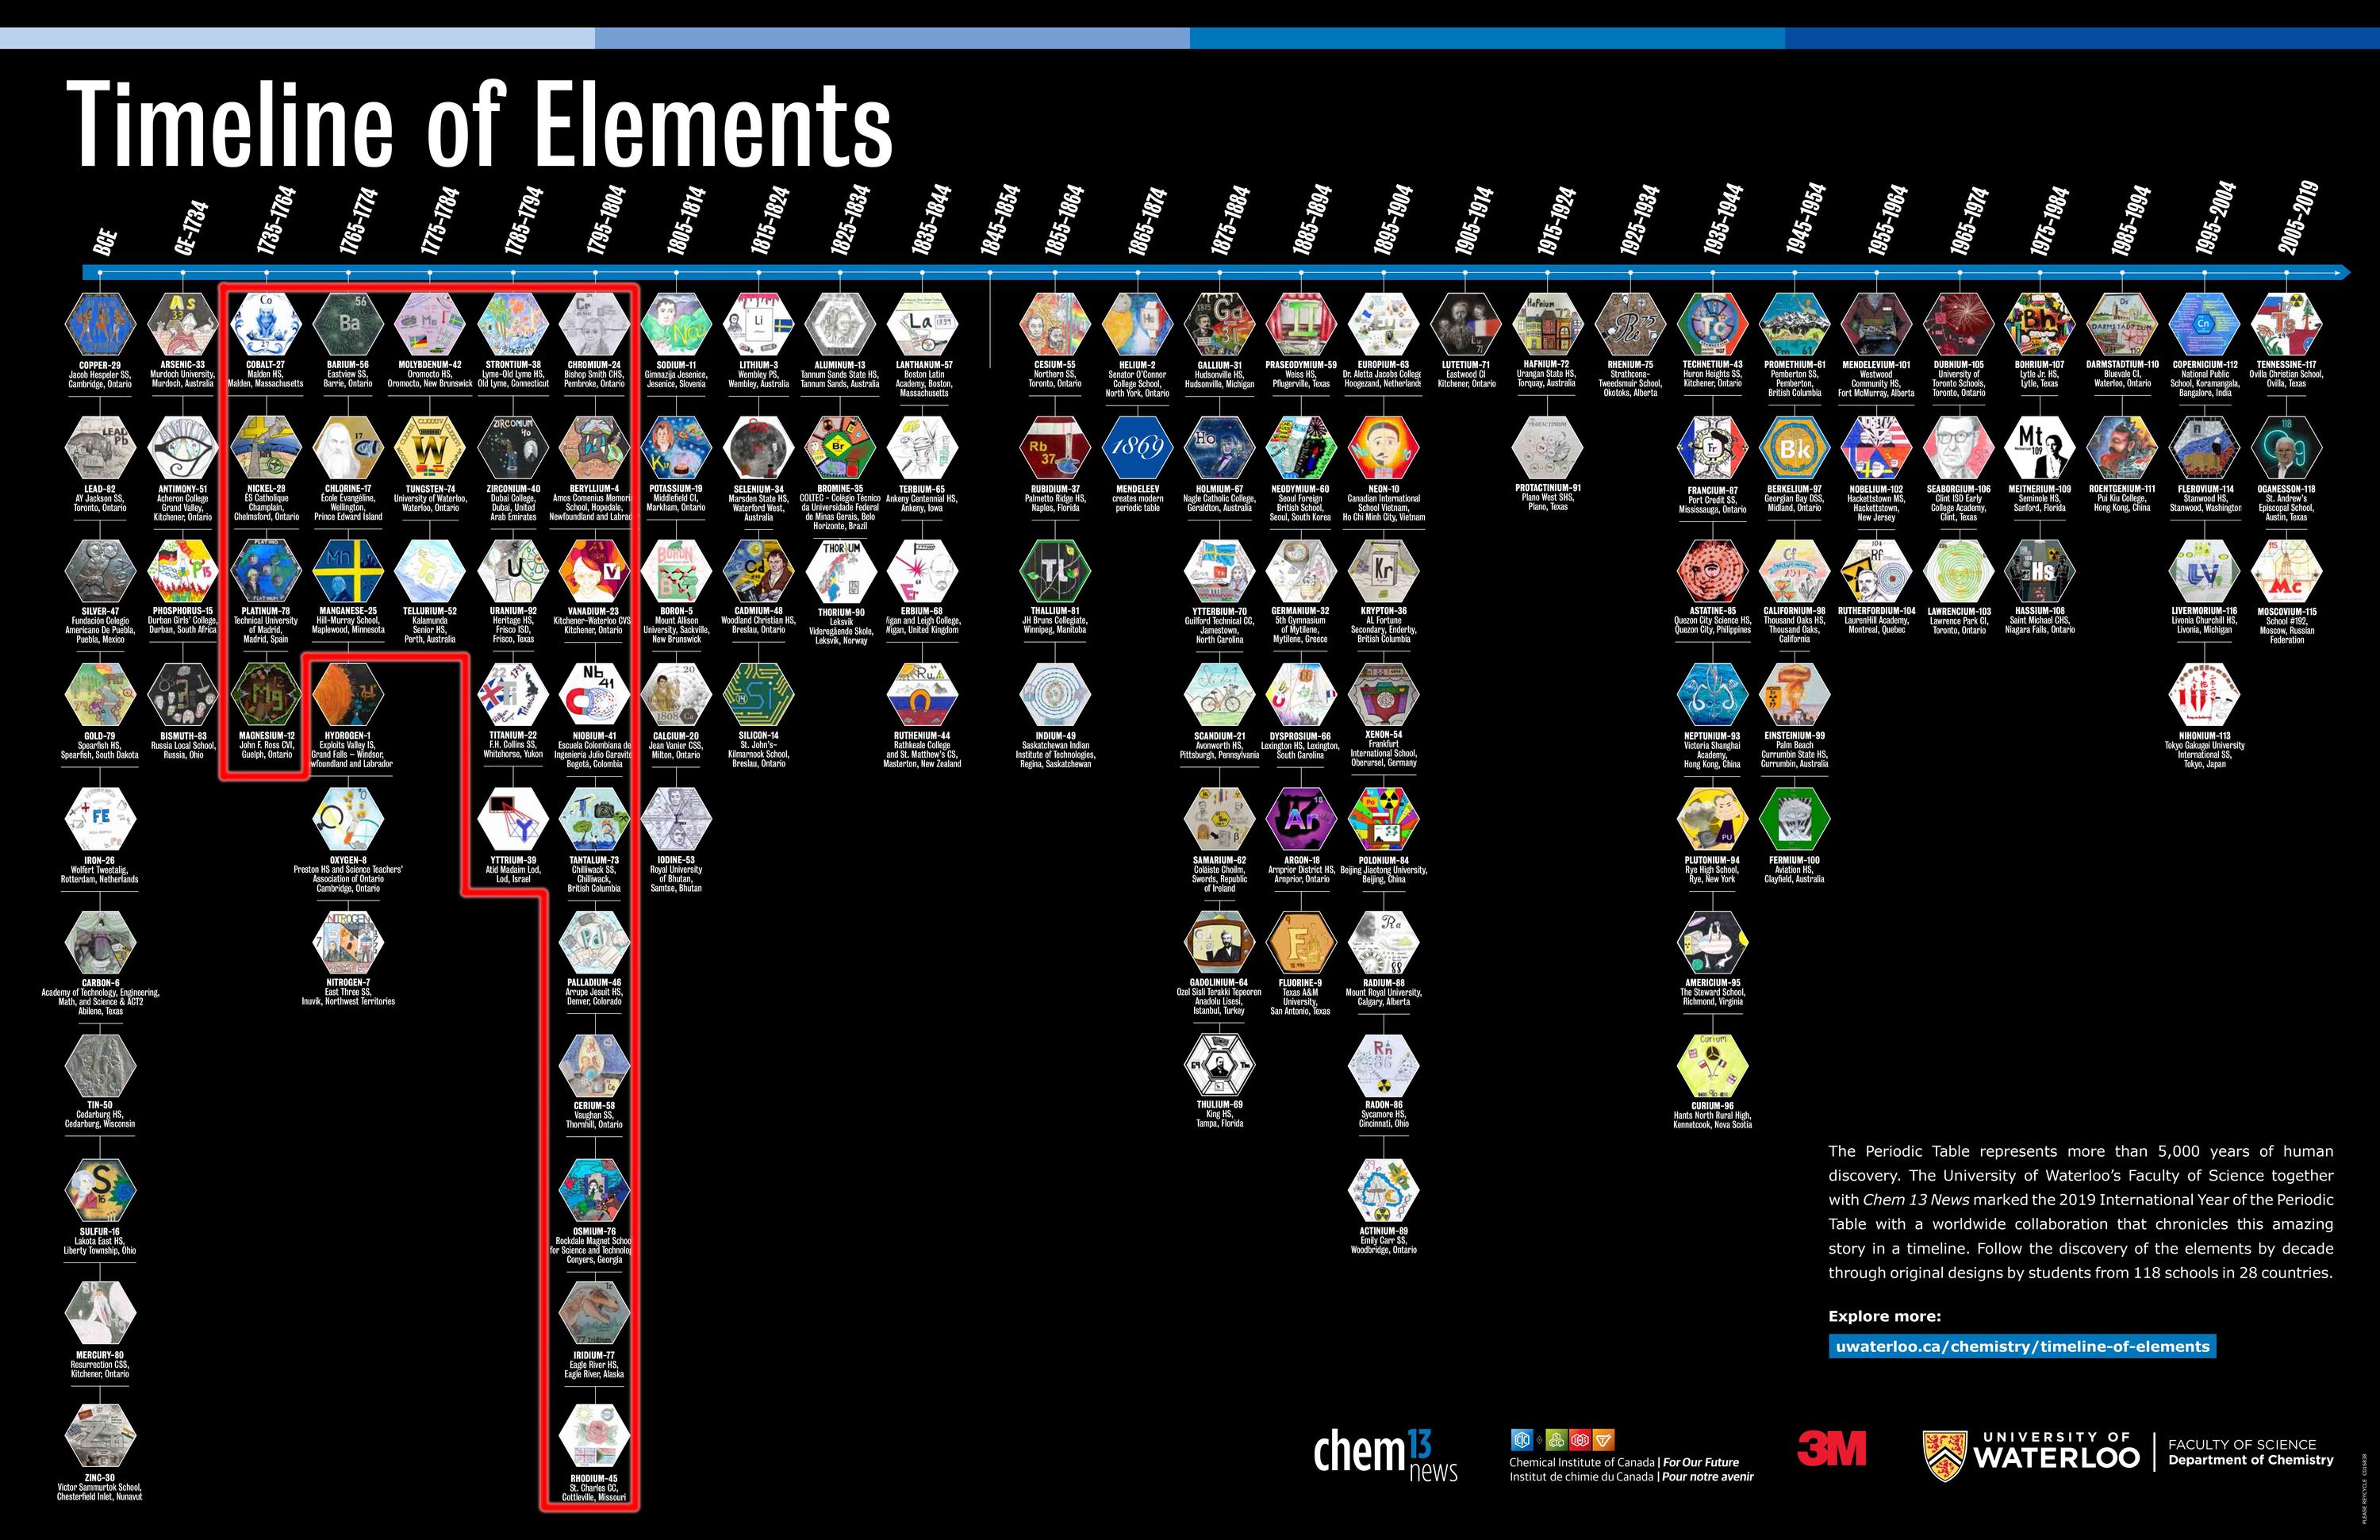 Timeline of Elements with the miner elements blocked in red